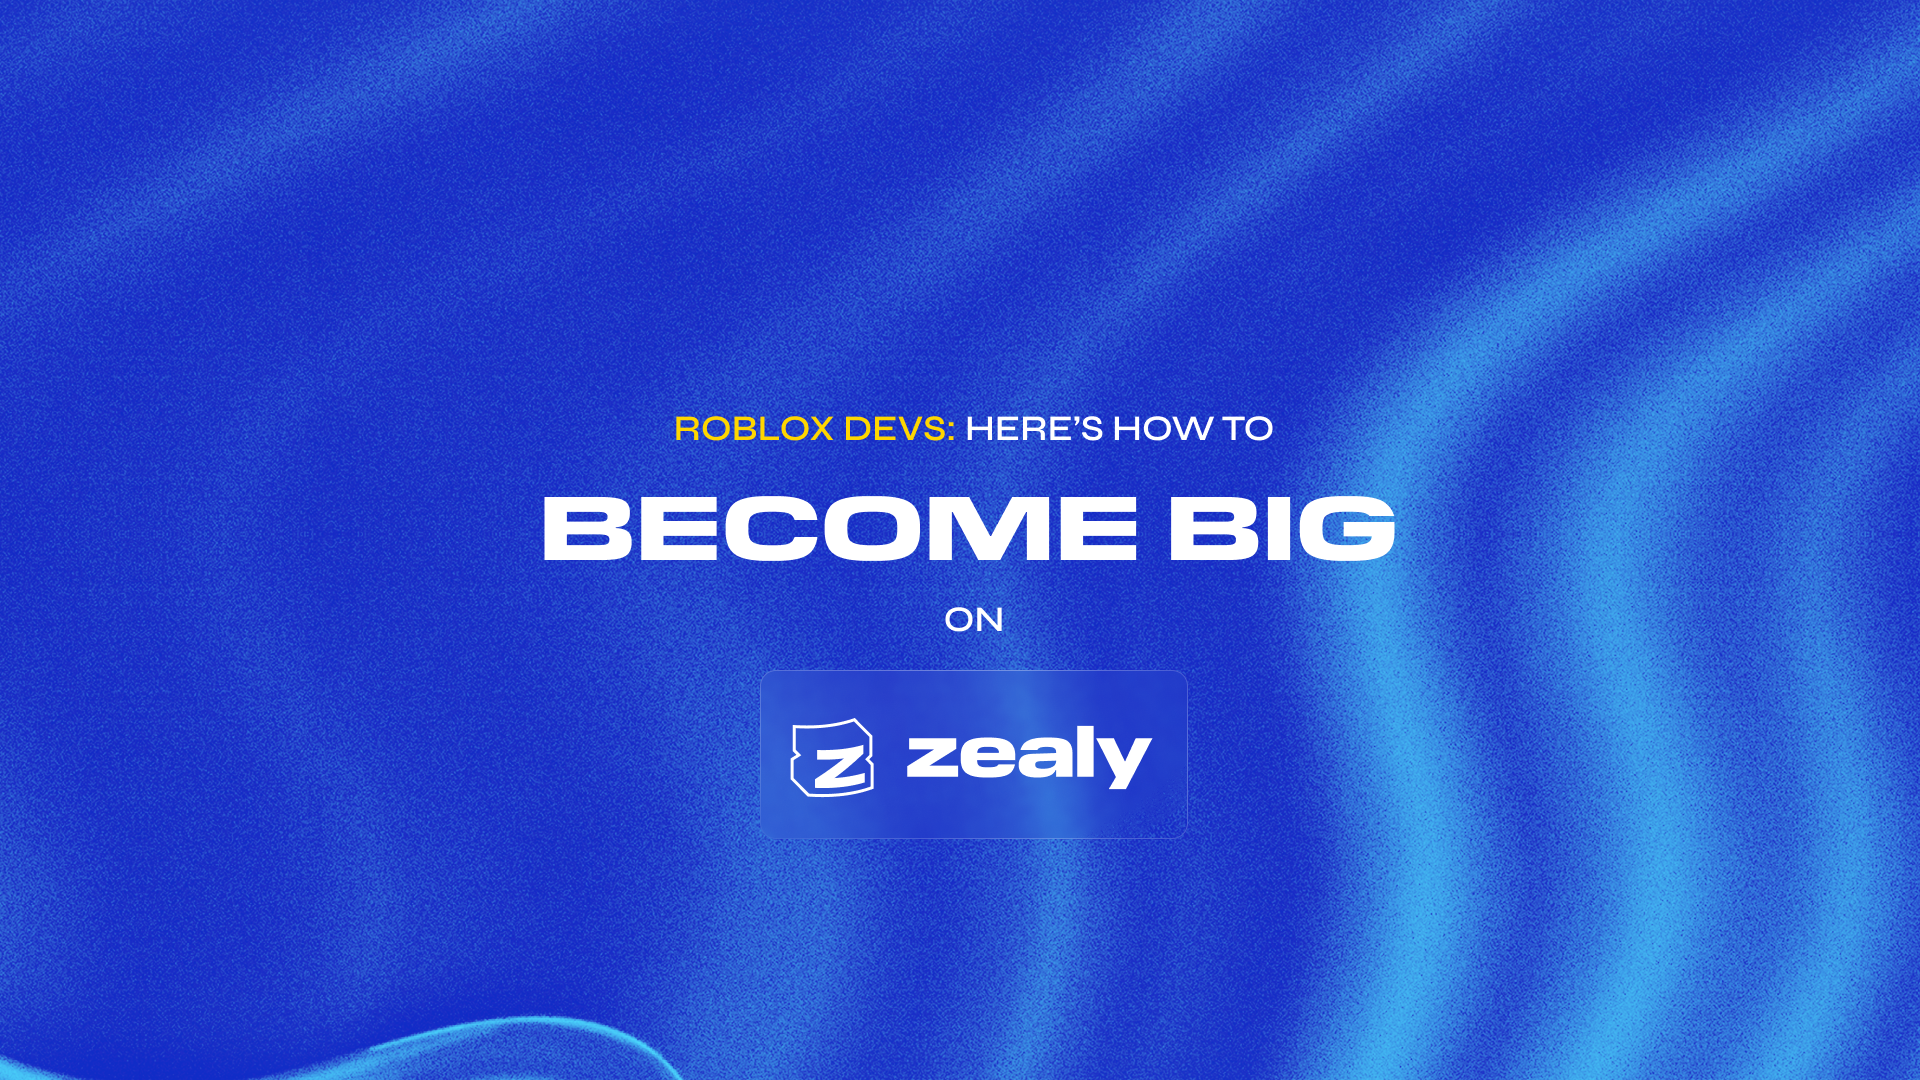 Roblox Devs: Become Big on Zealy (Part 2 of 3)